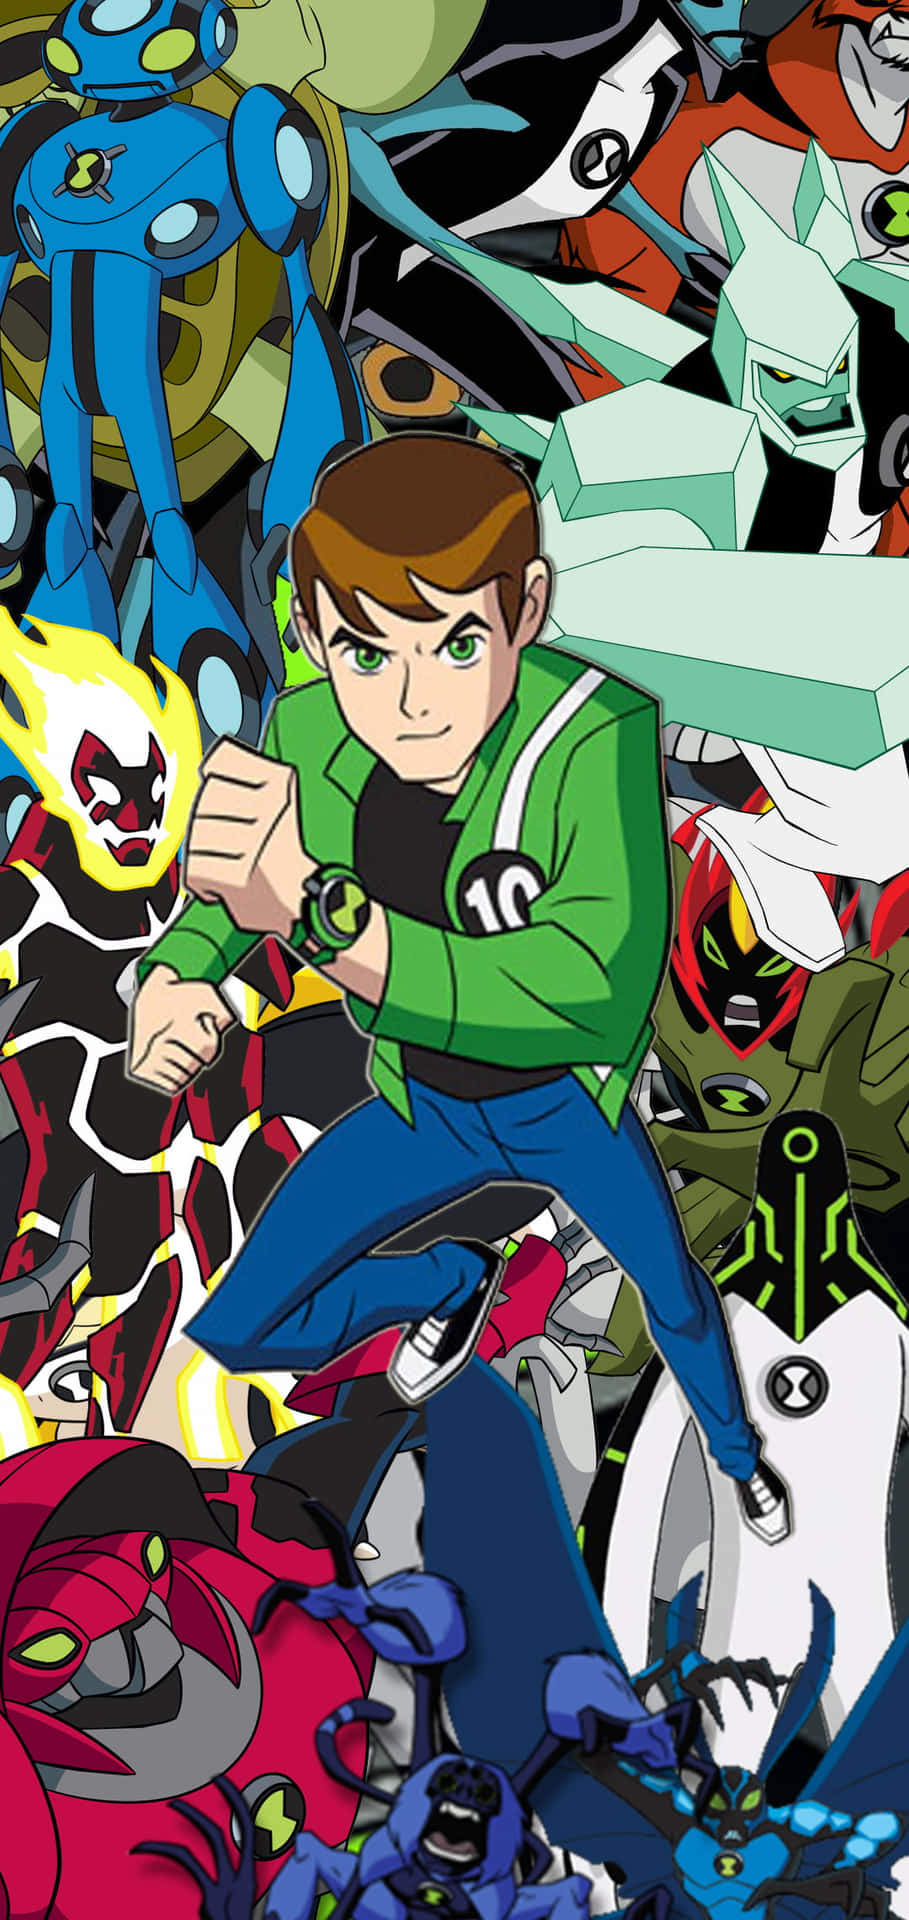 Ben 10 stands with courage and power